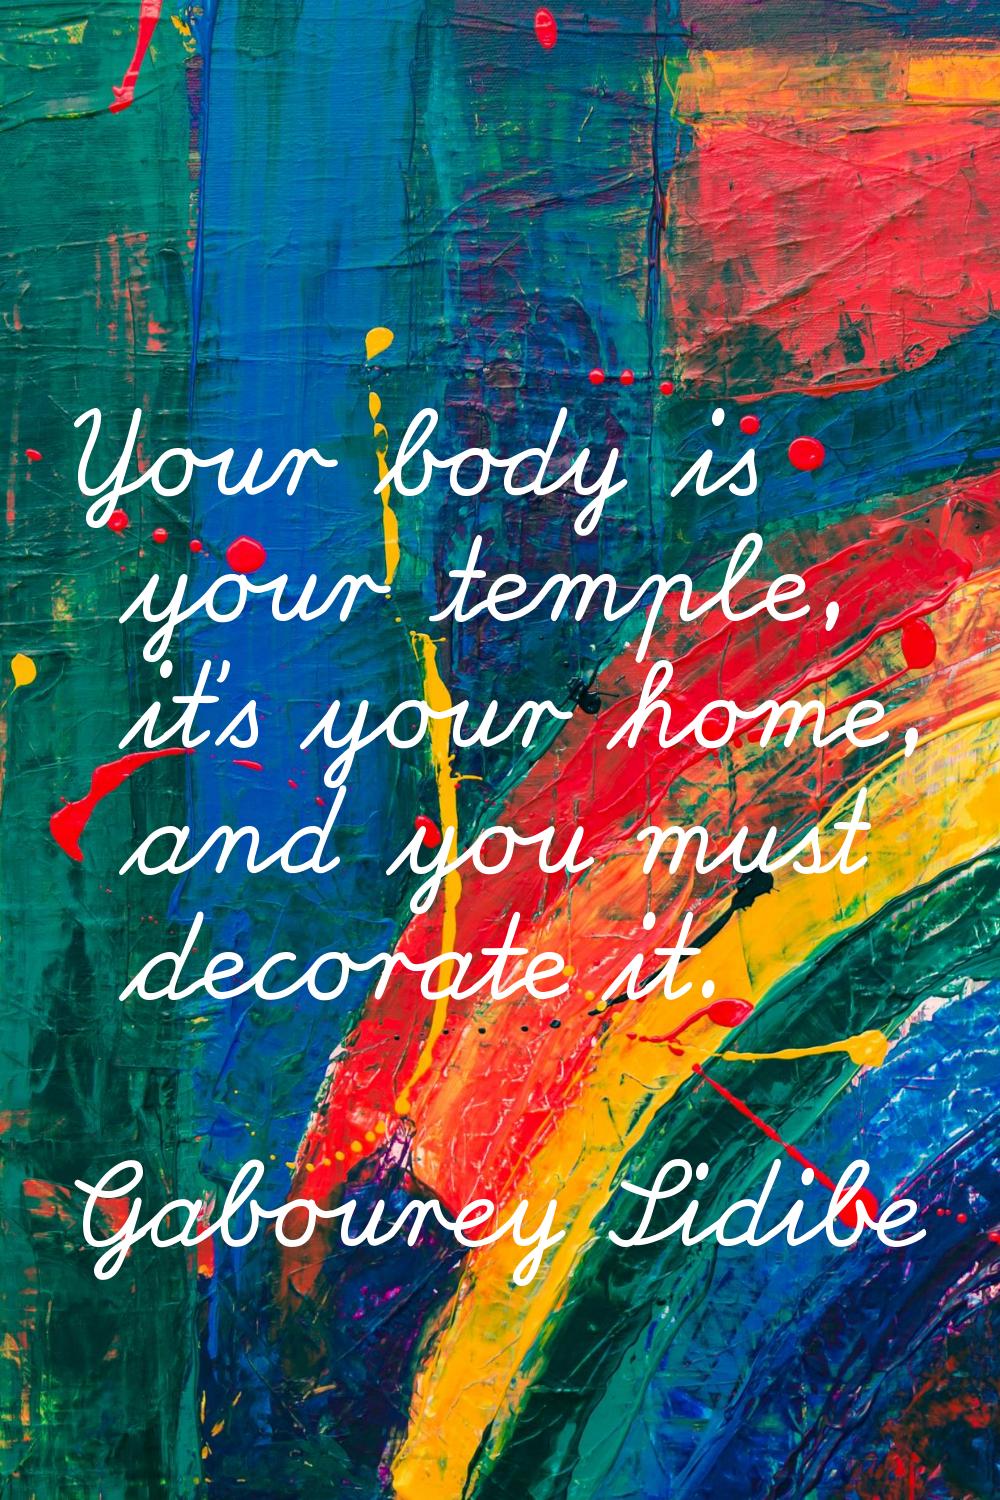 Your body is your temple, it's your home, and you must decorate it.